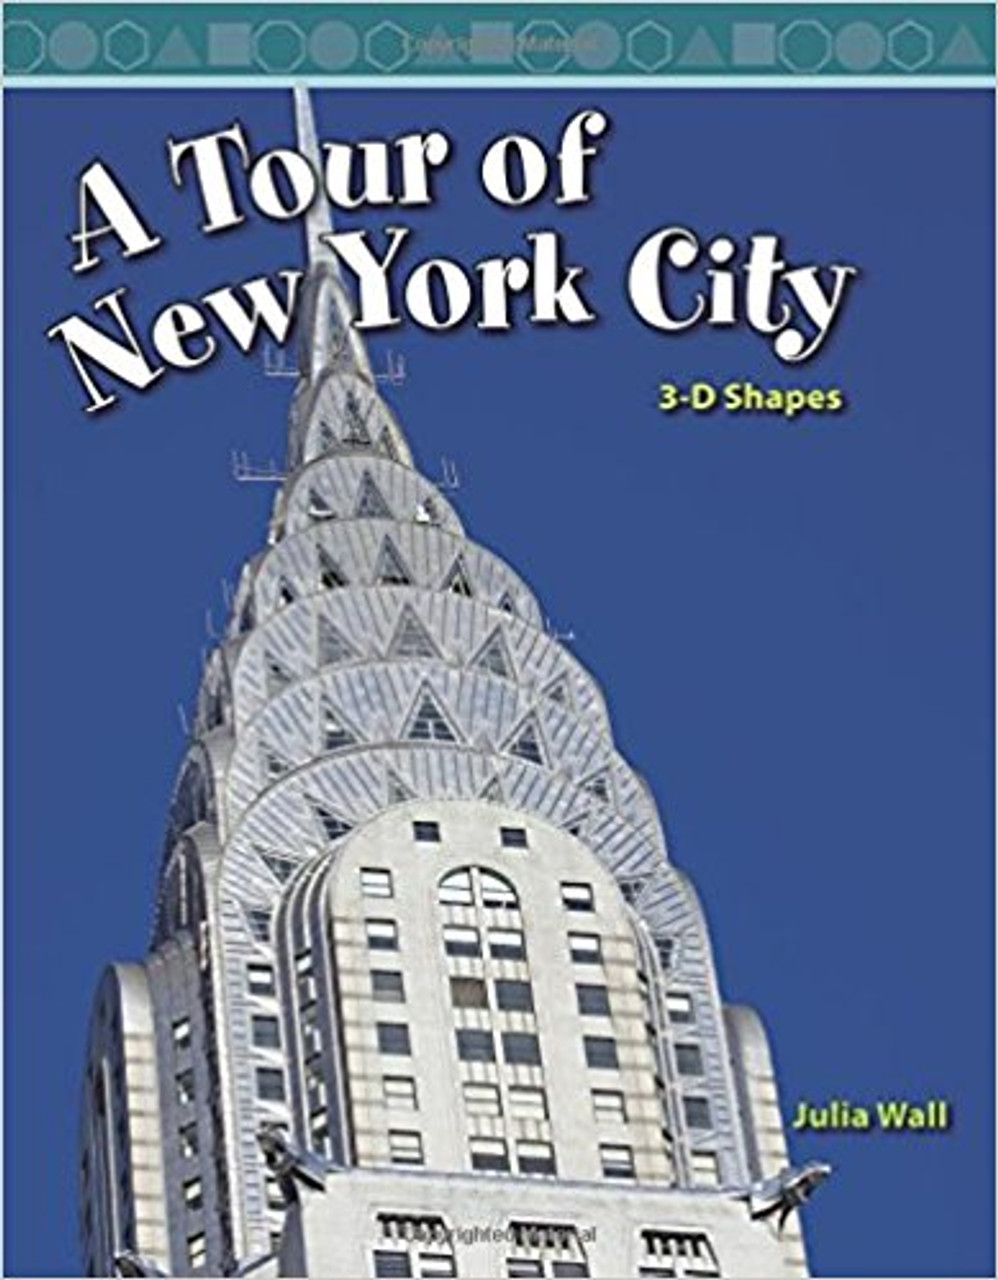 A Tour of New York City by Julia Wall